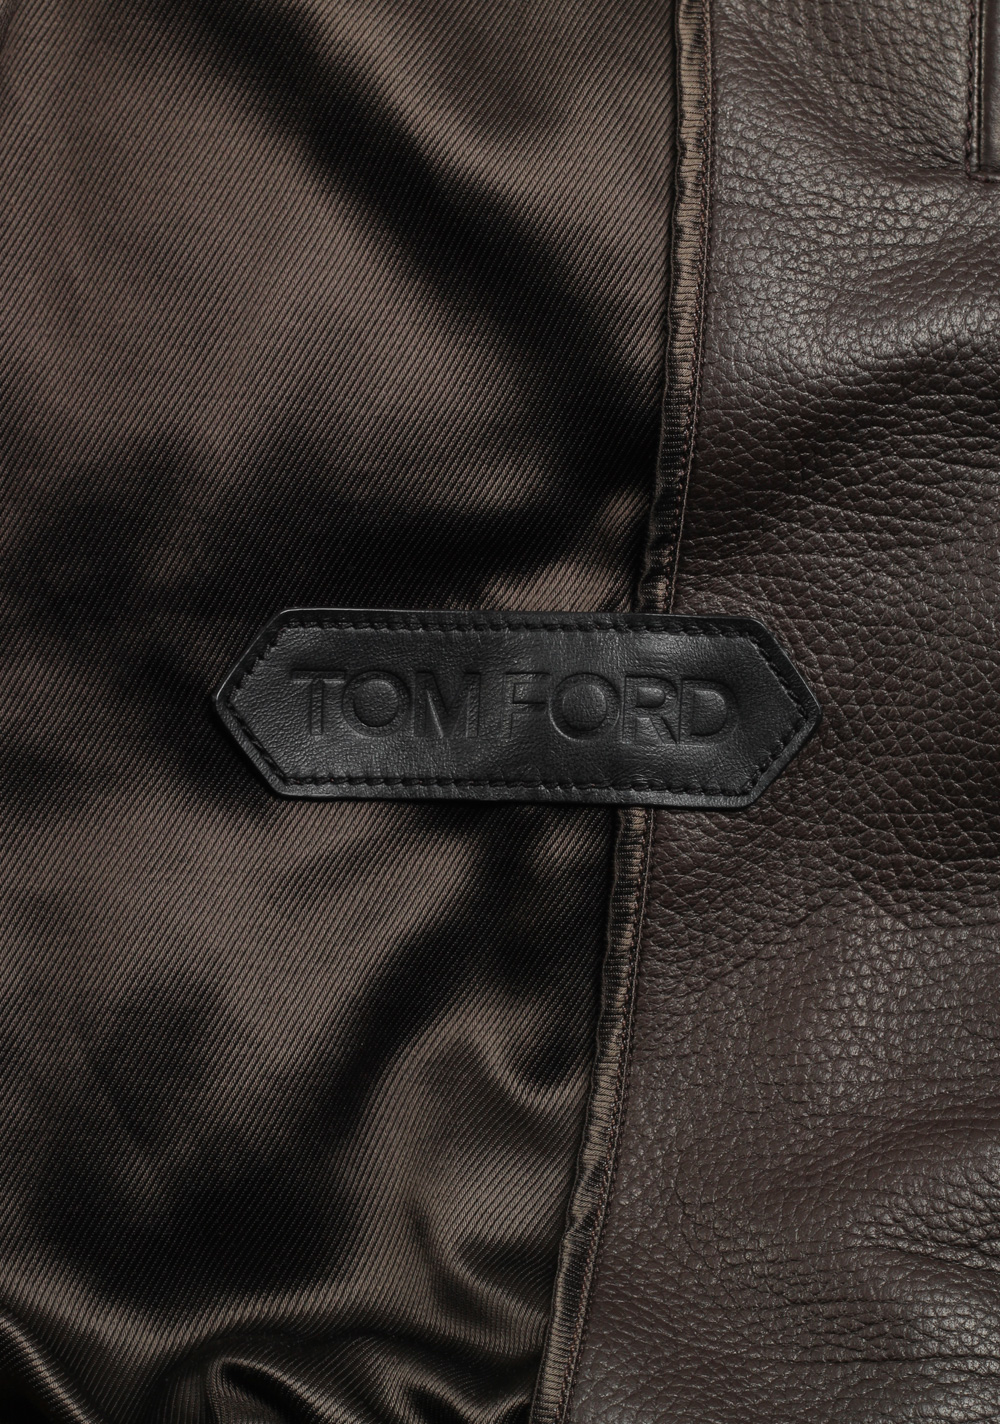 TOM FORD Brown Leather Coat Jacket | Costume Limité